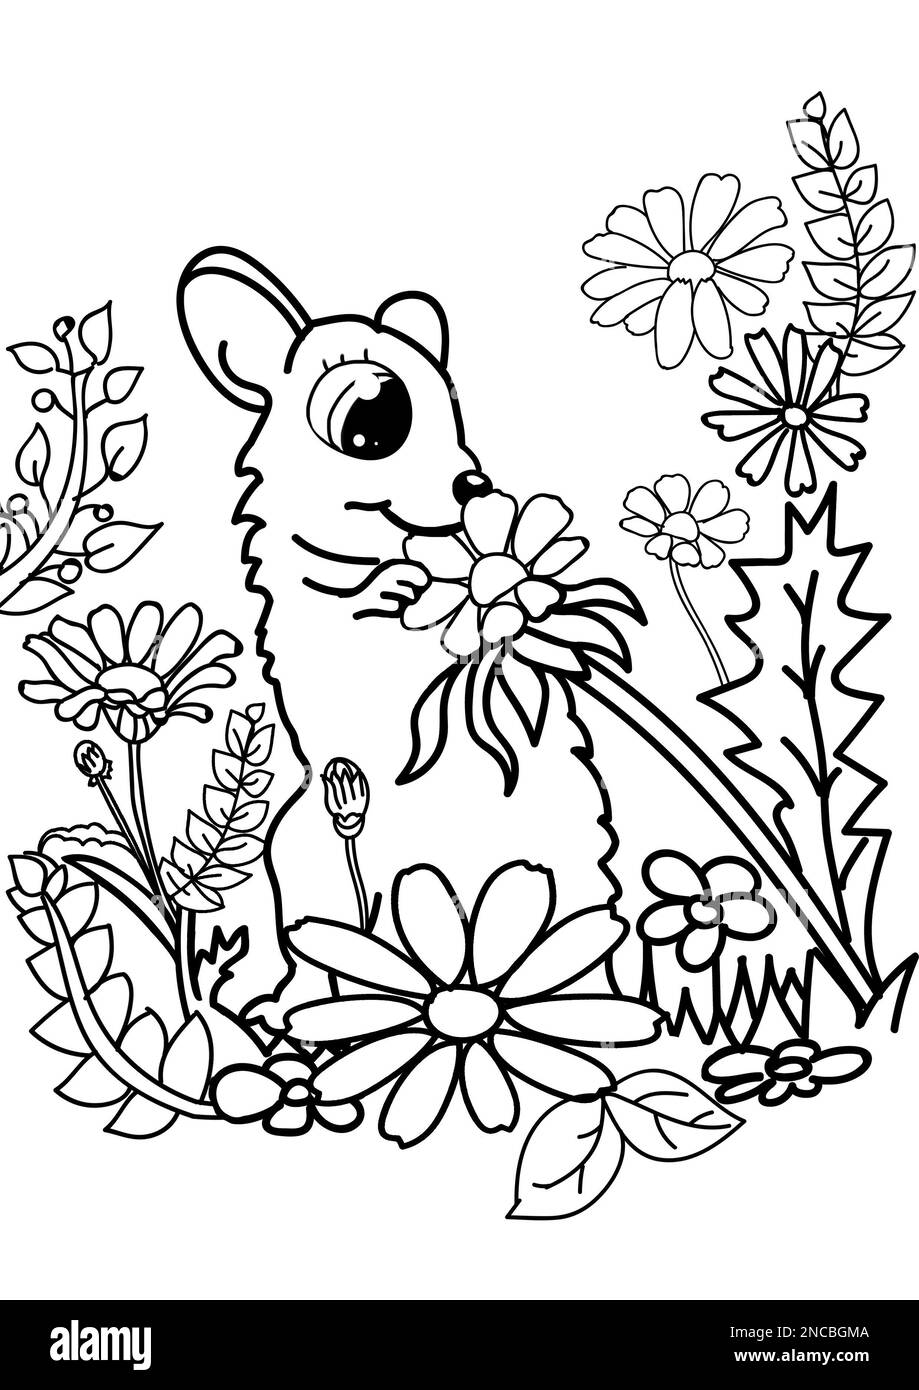 Cute mouse and flowers on white background, illustration. Coloring page Stock Photo